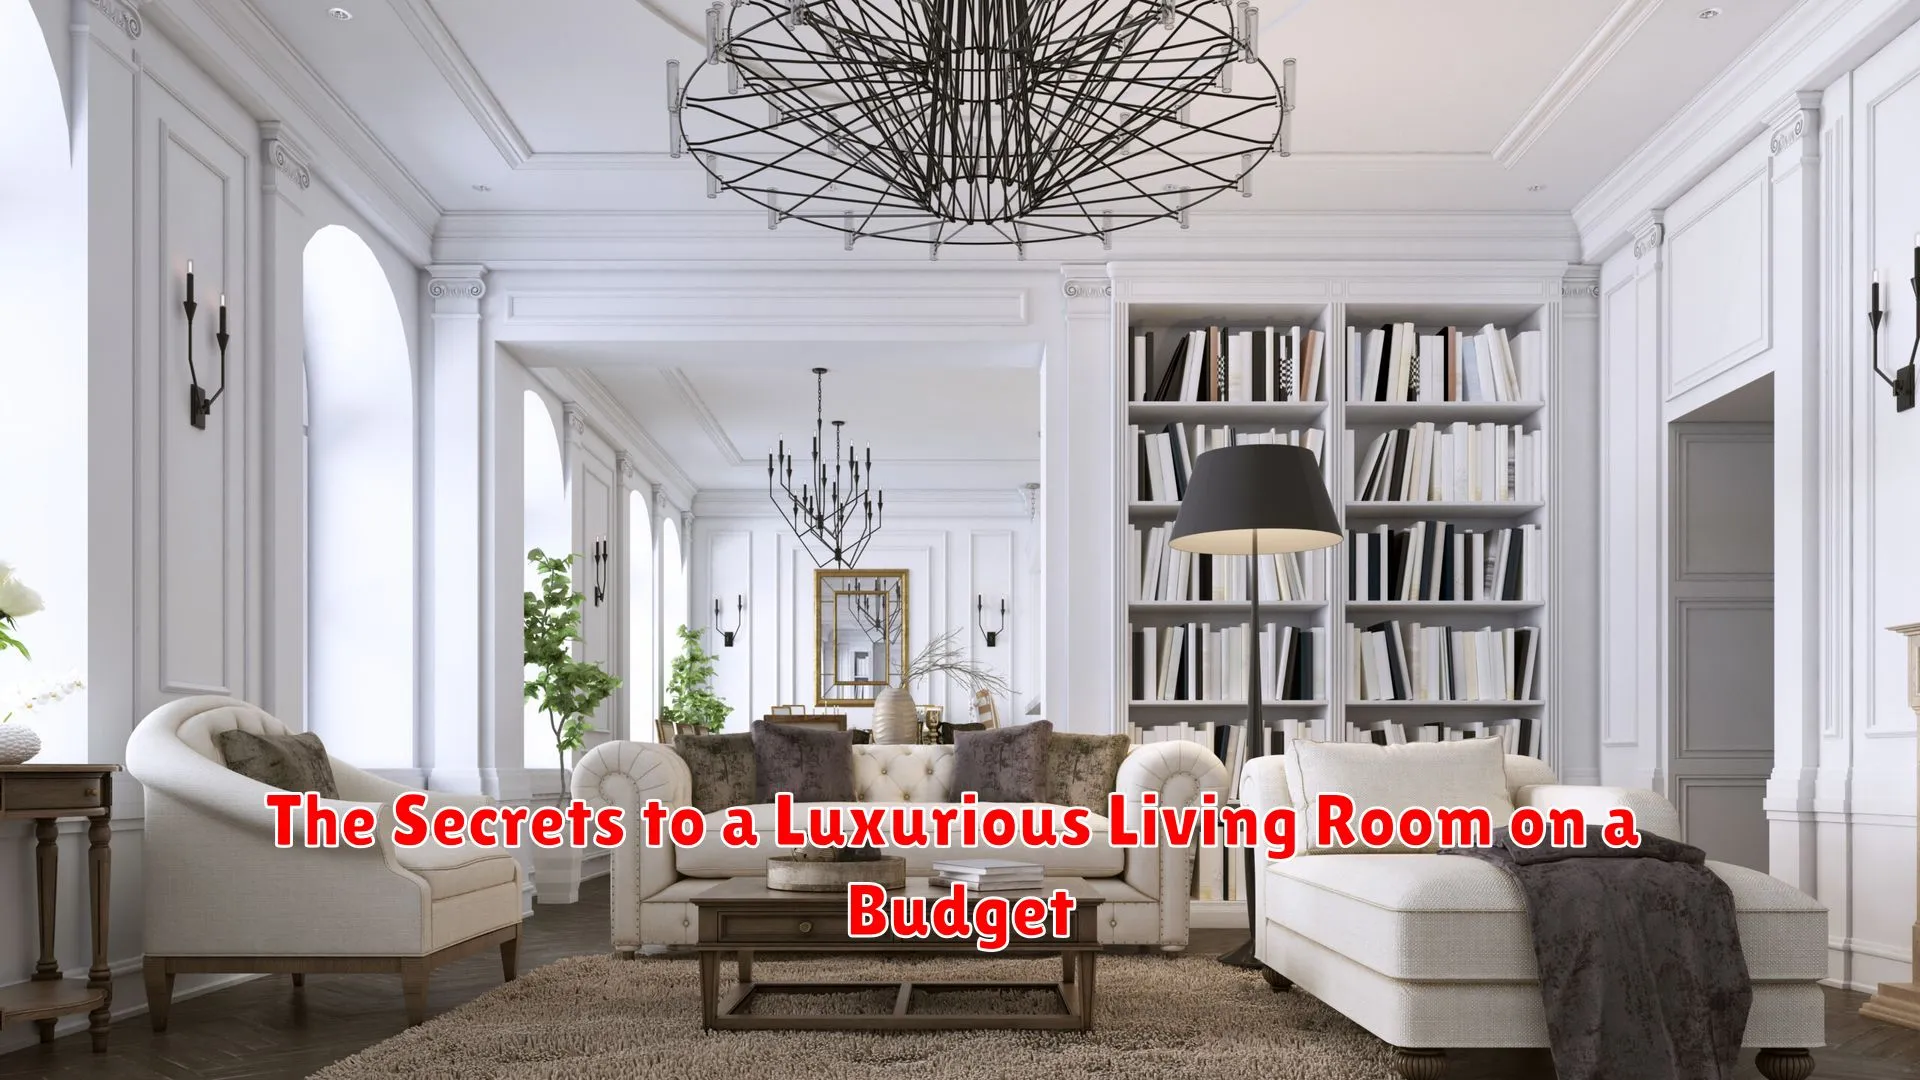 The Secrets to a Luxurious Living Room on a Budget